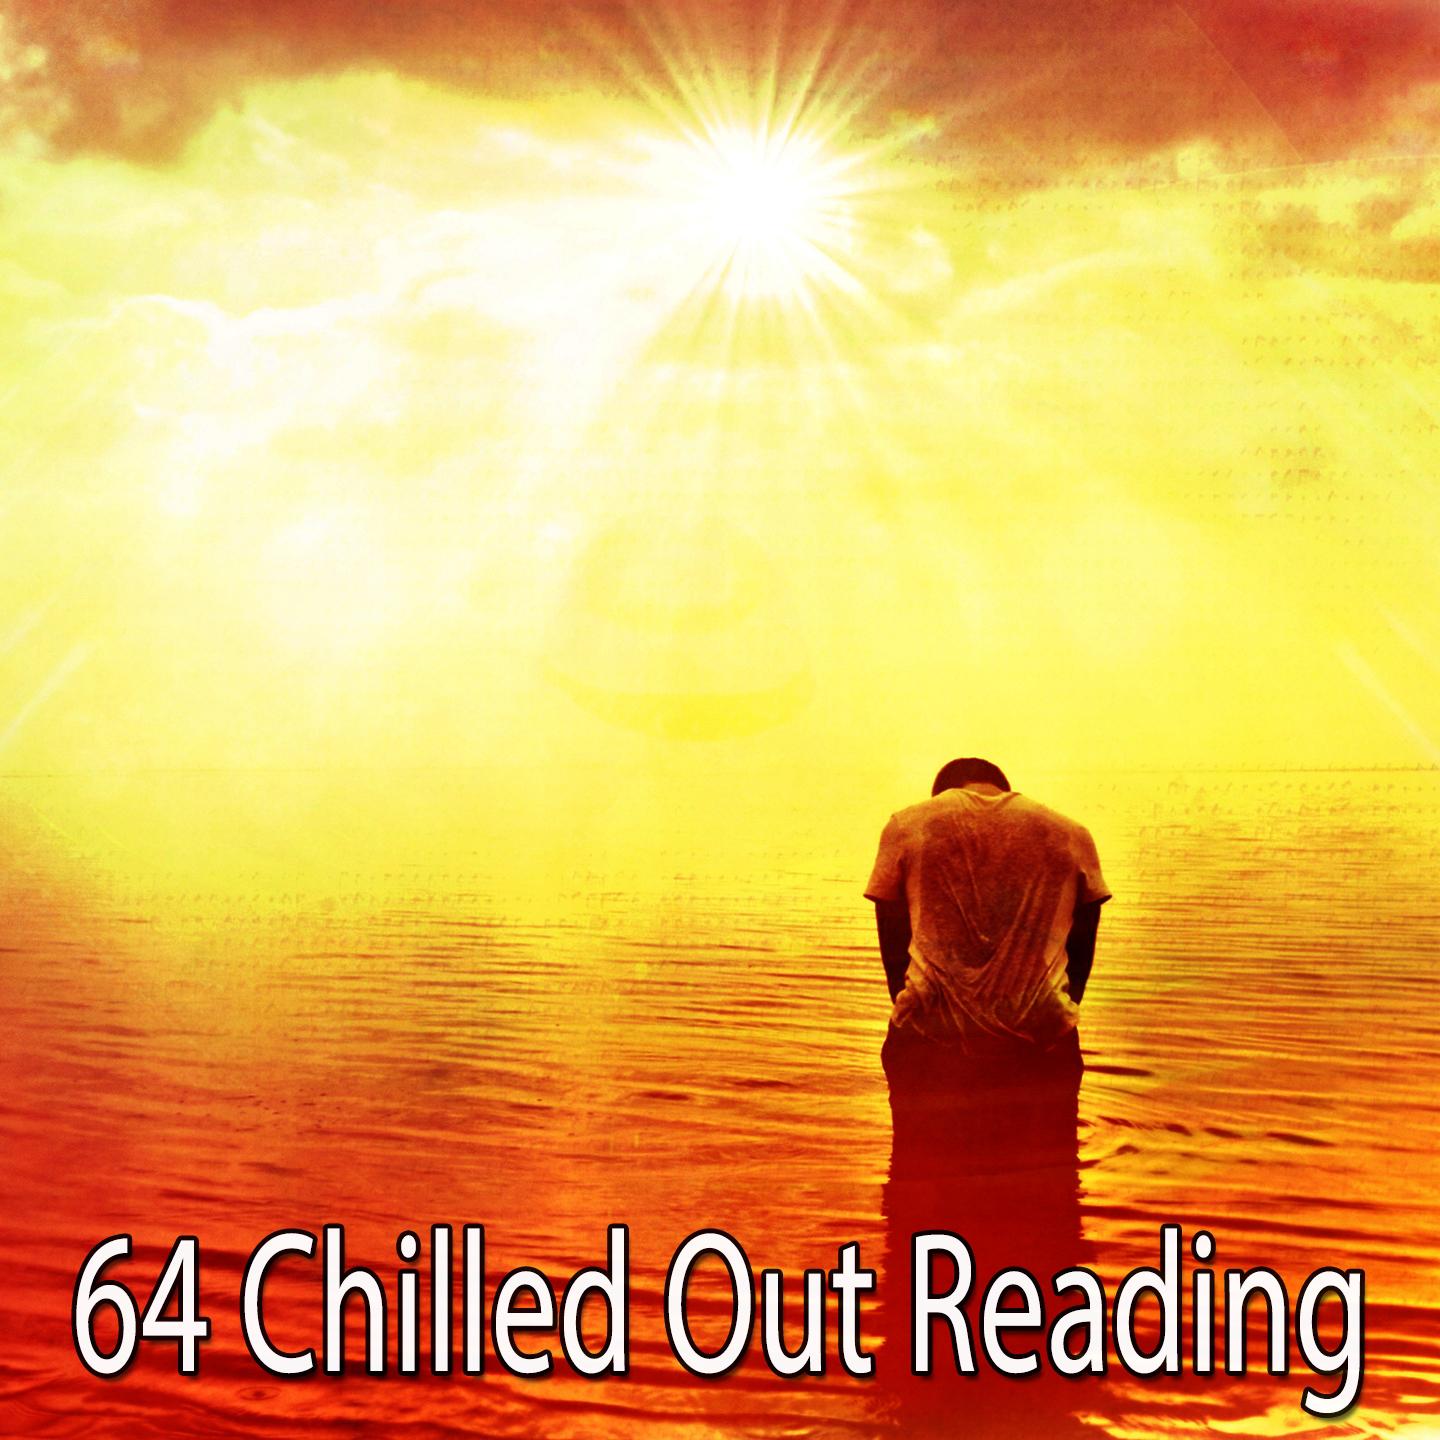 64 Chilled out Reading